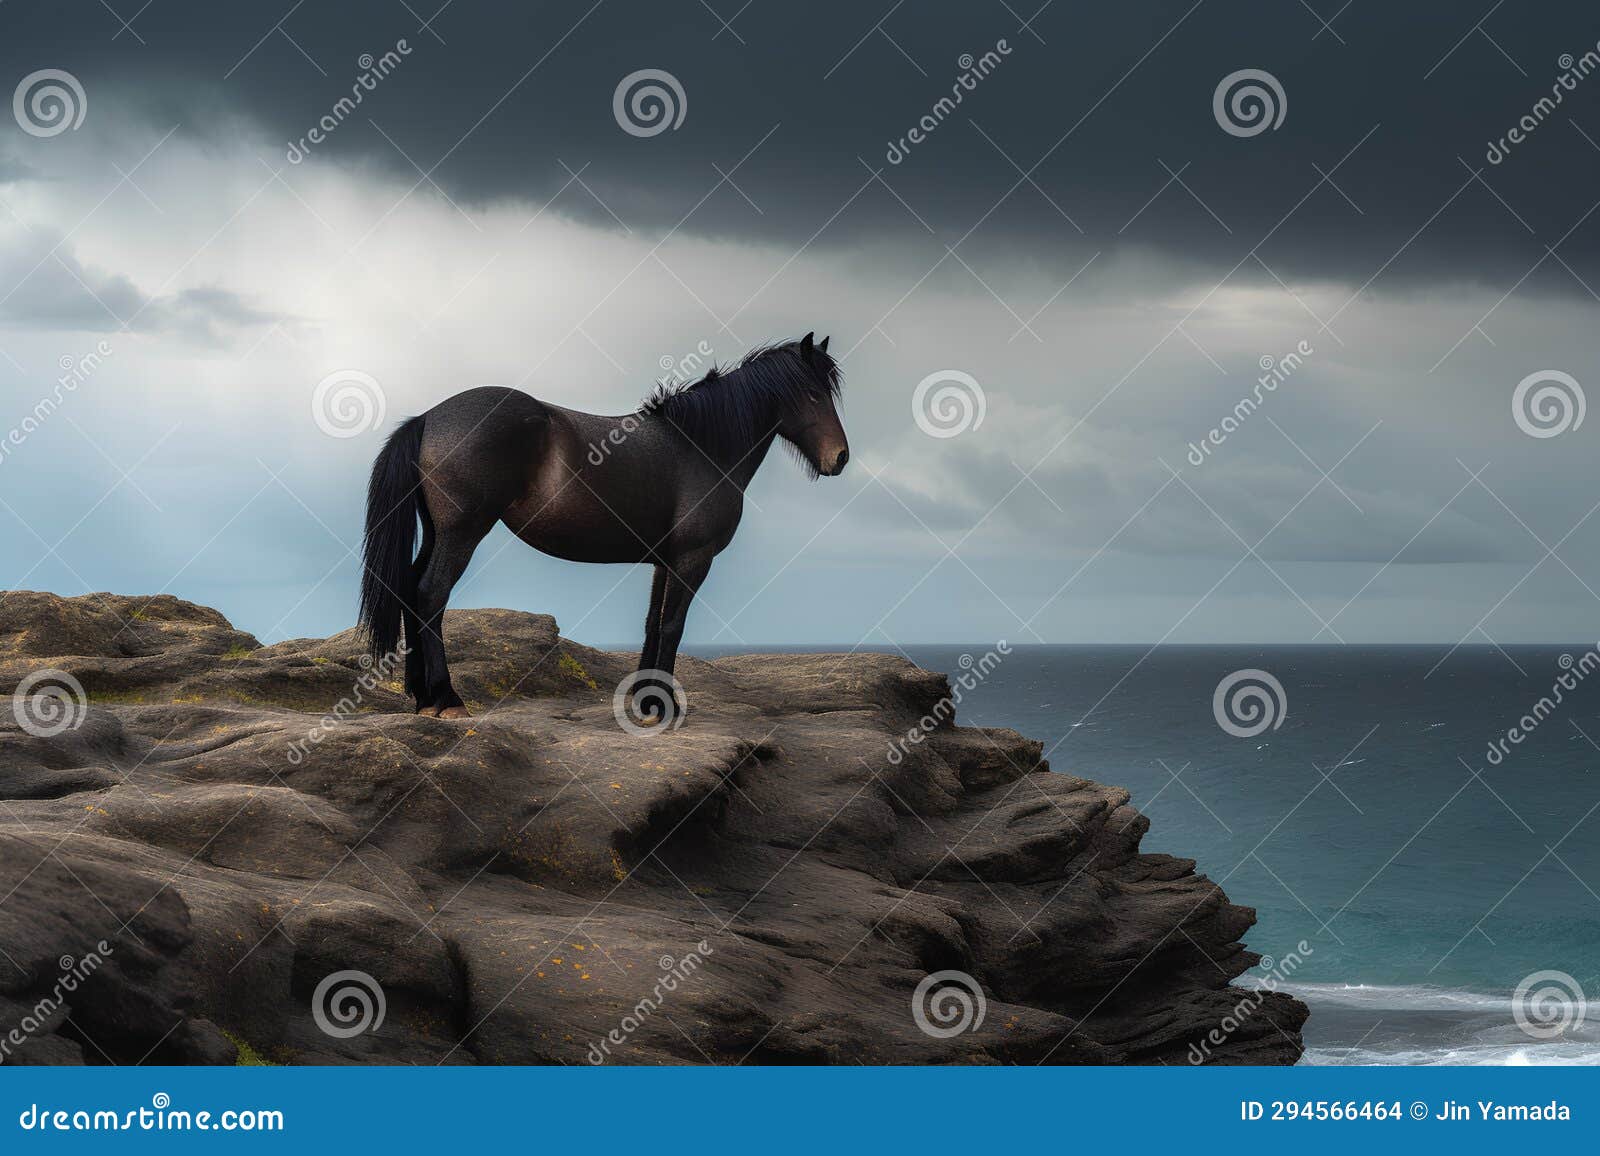 horse on the cliff against stormy sky. 3d render